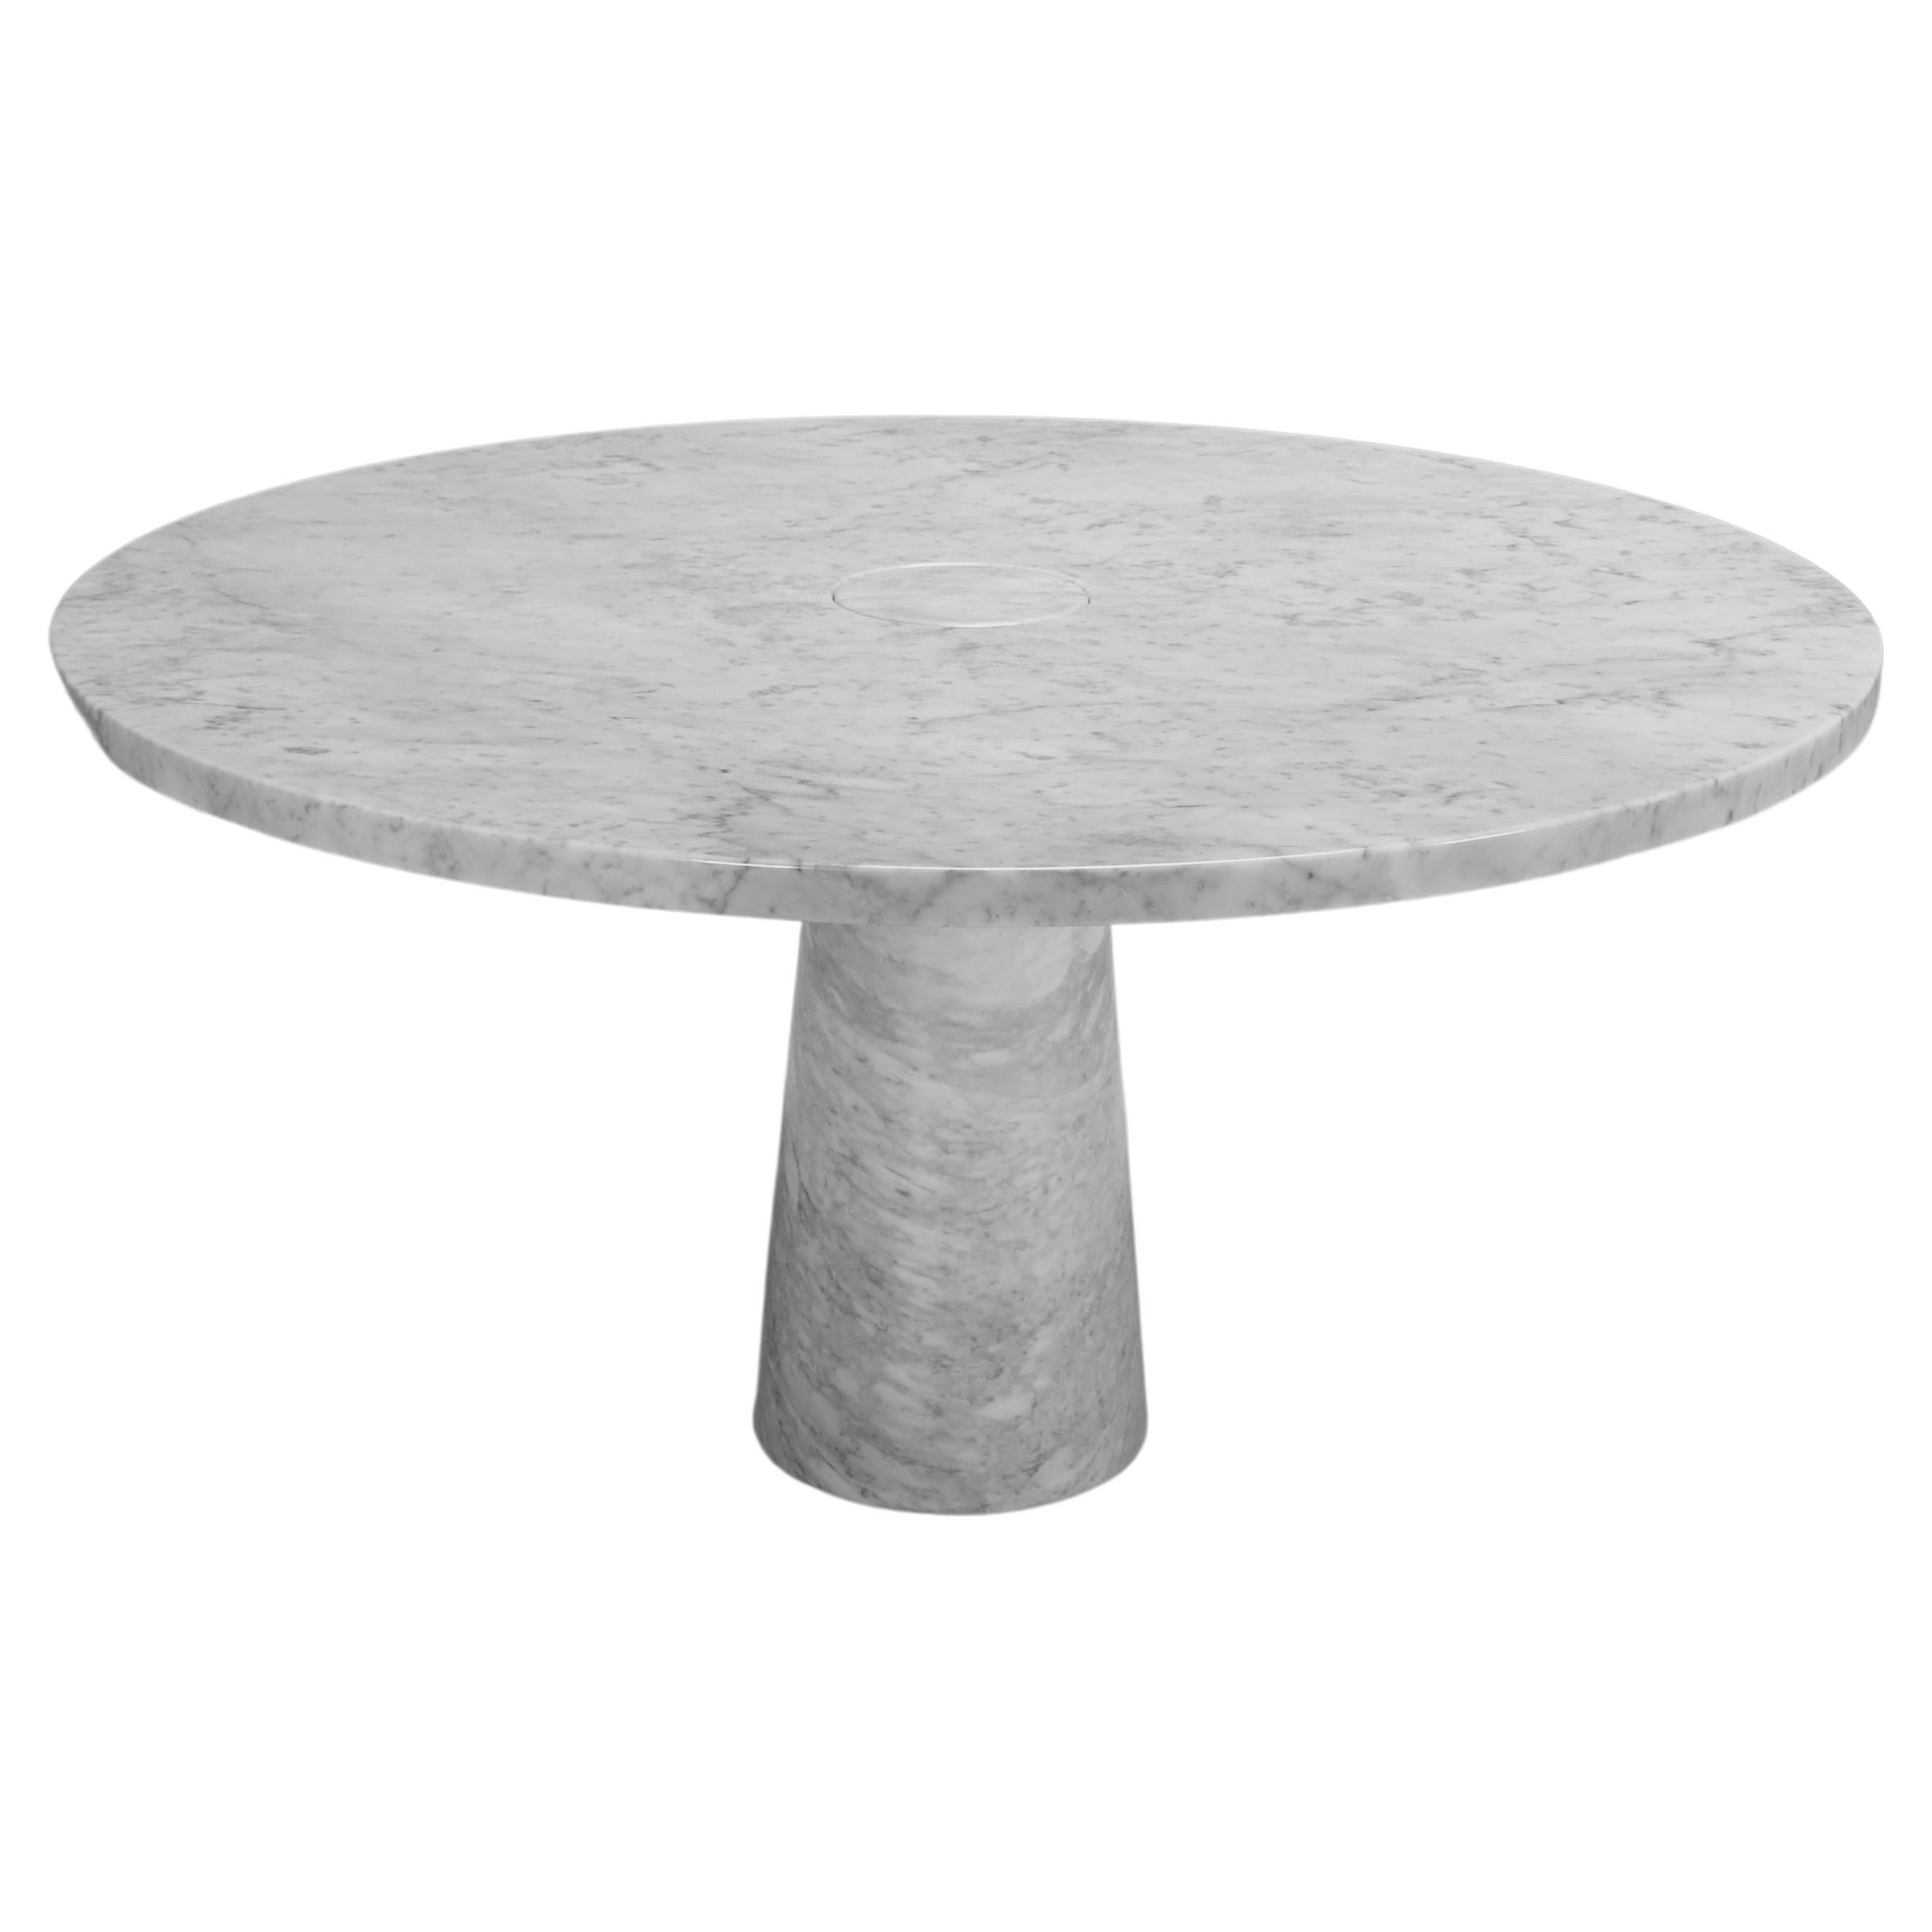 Original ‘Eros’ Dining Table in Carrara Marble by Angelo Mangiarotti, 1970s For Sale